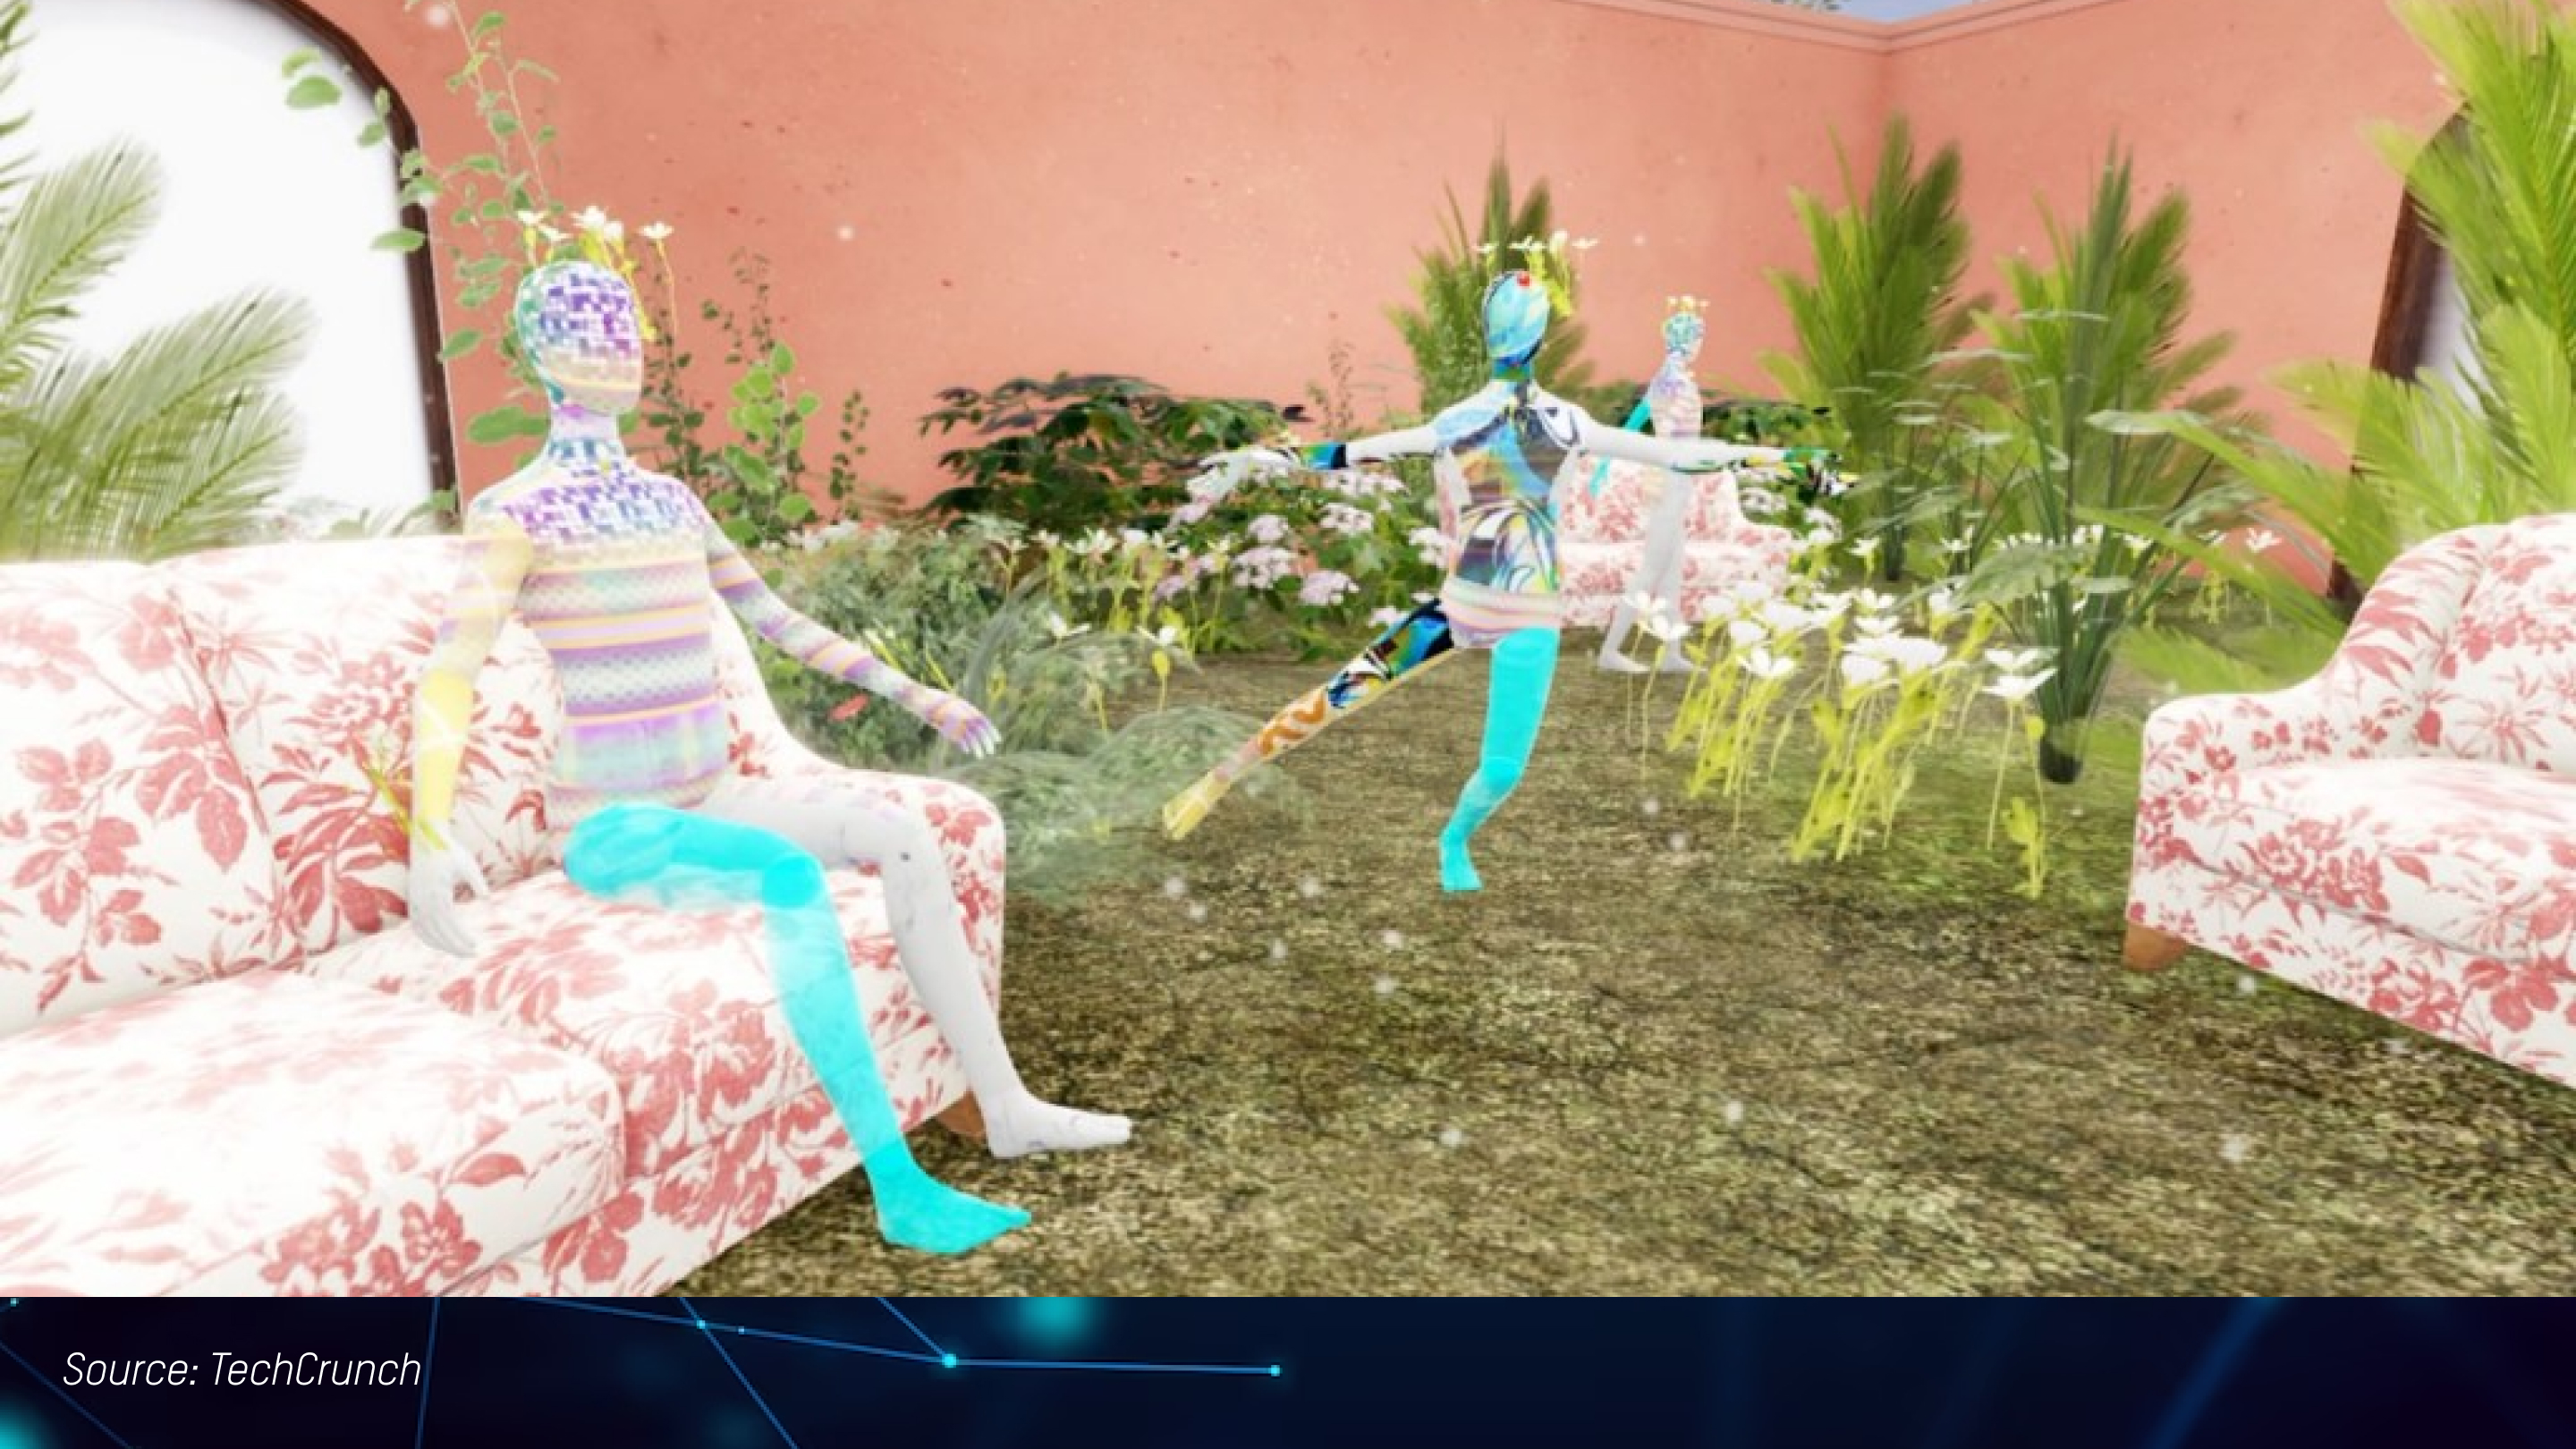 Gucci virtual 3D space with humanoid figures in a garden.